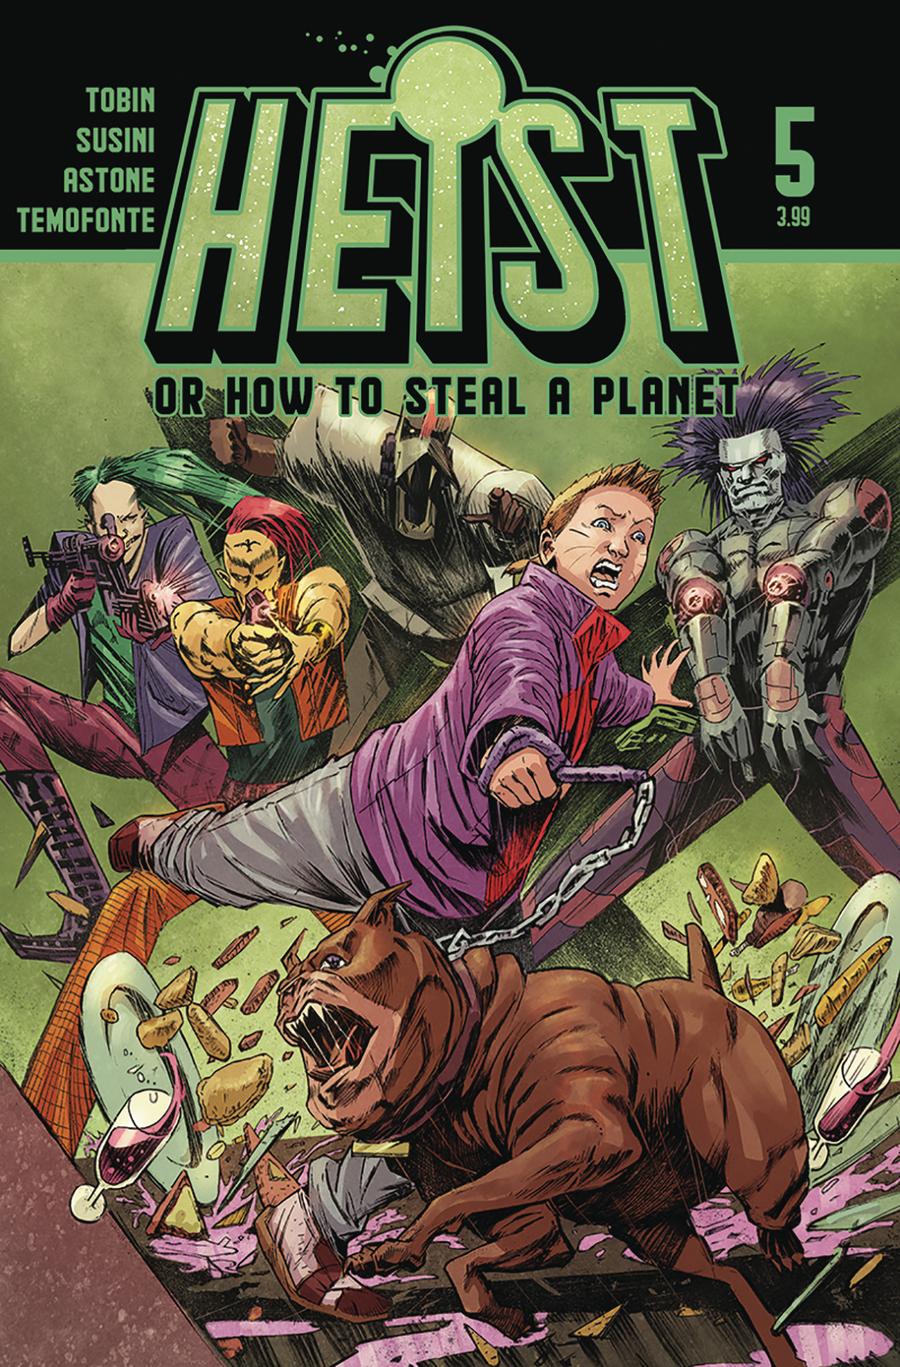 Heist Or How To Steal A Planet #5